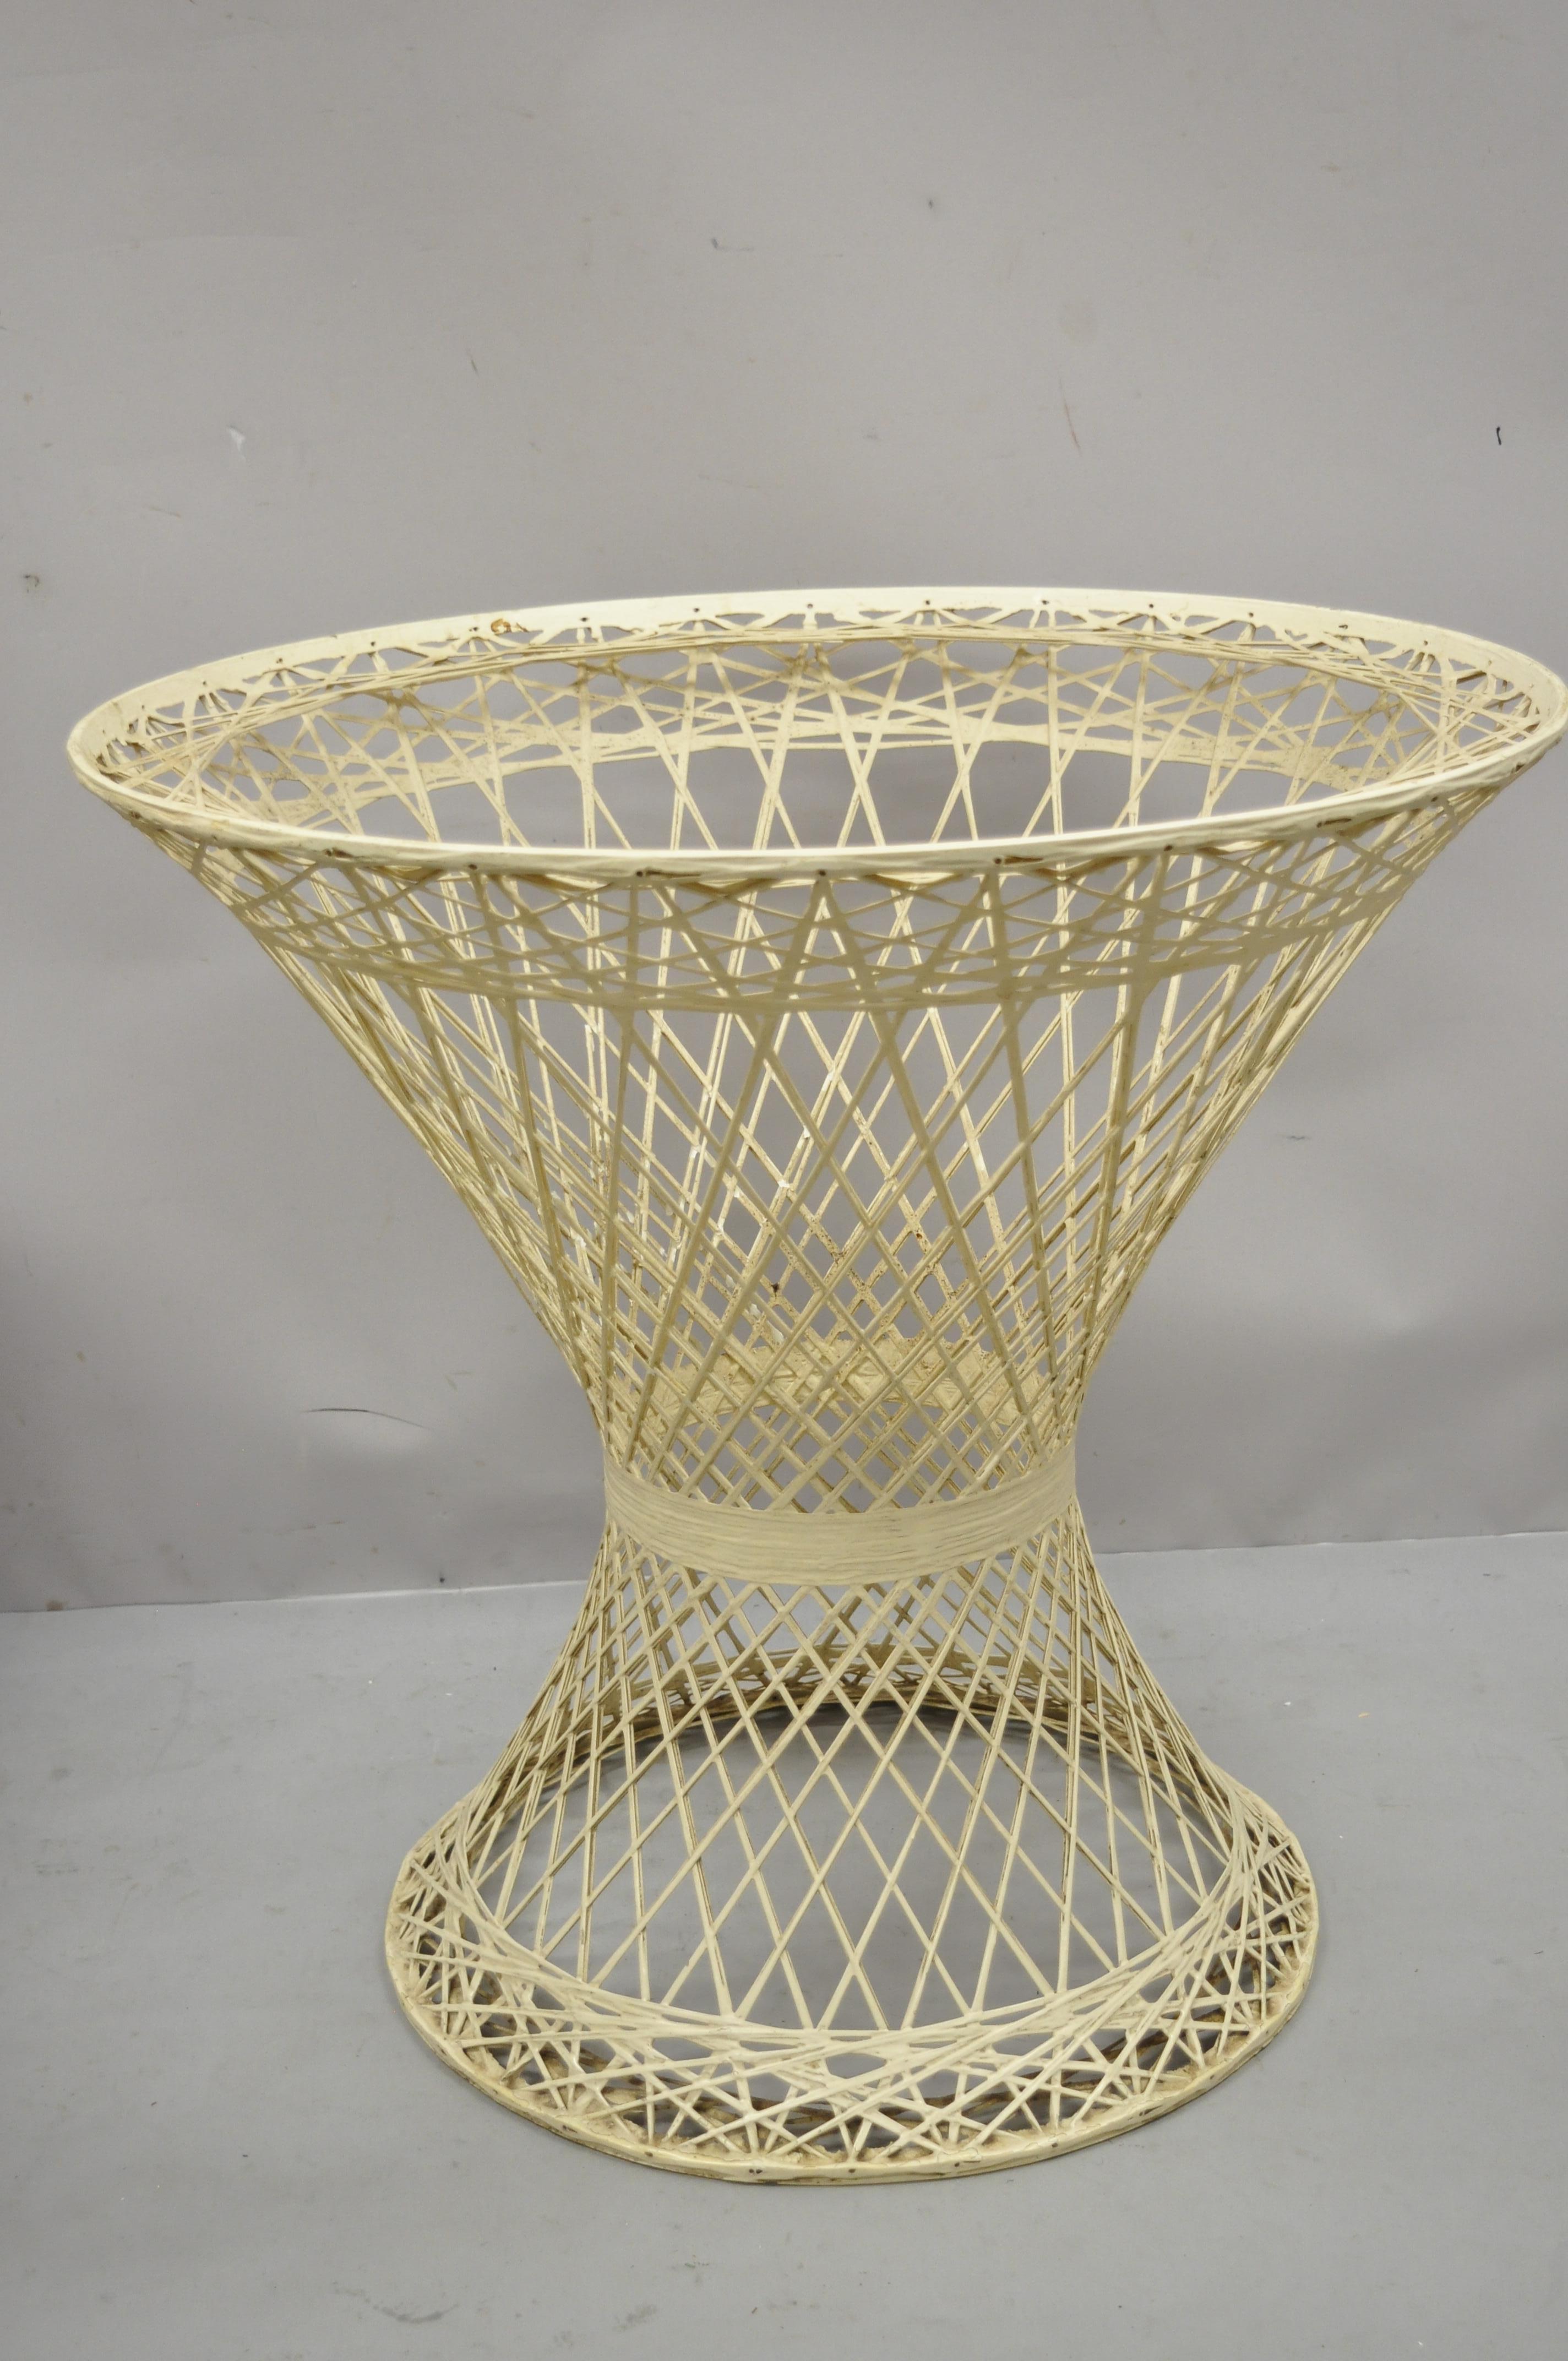 Vintage Russell Woodard Woven Spun Fiberglass Mid-Century Modern round pedestal dining table base. Can be used with either side up. Item features spun woven fiberglass construction, quality American craftsmanship, great style and form. Circa Mid